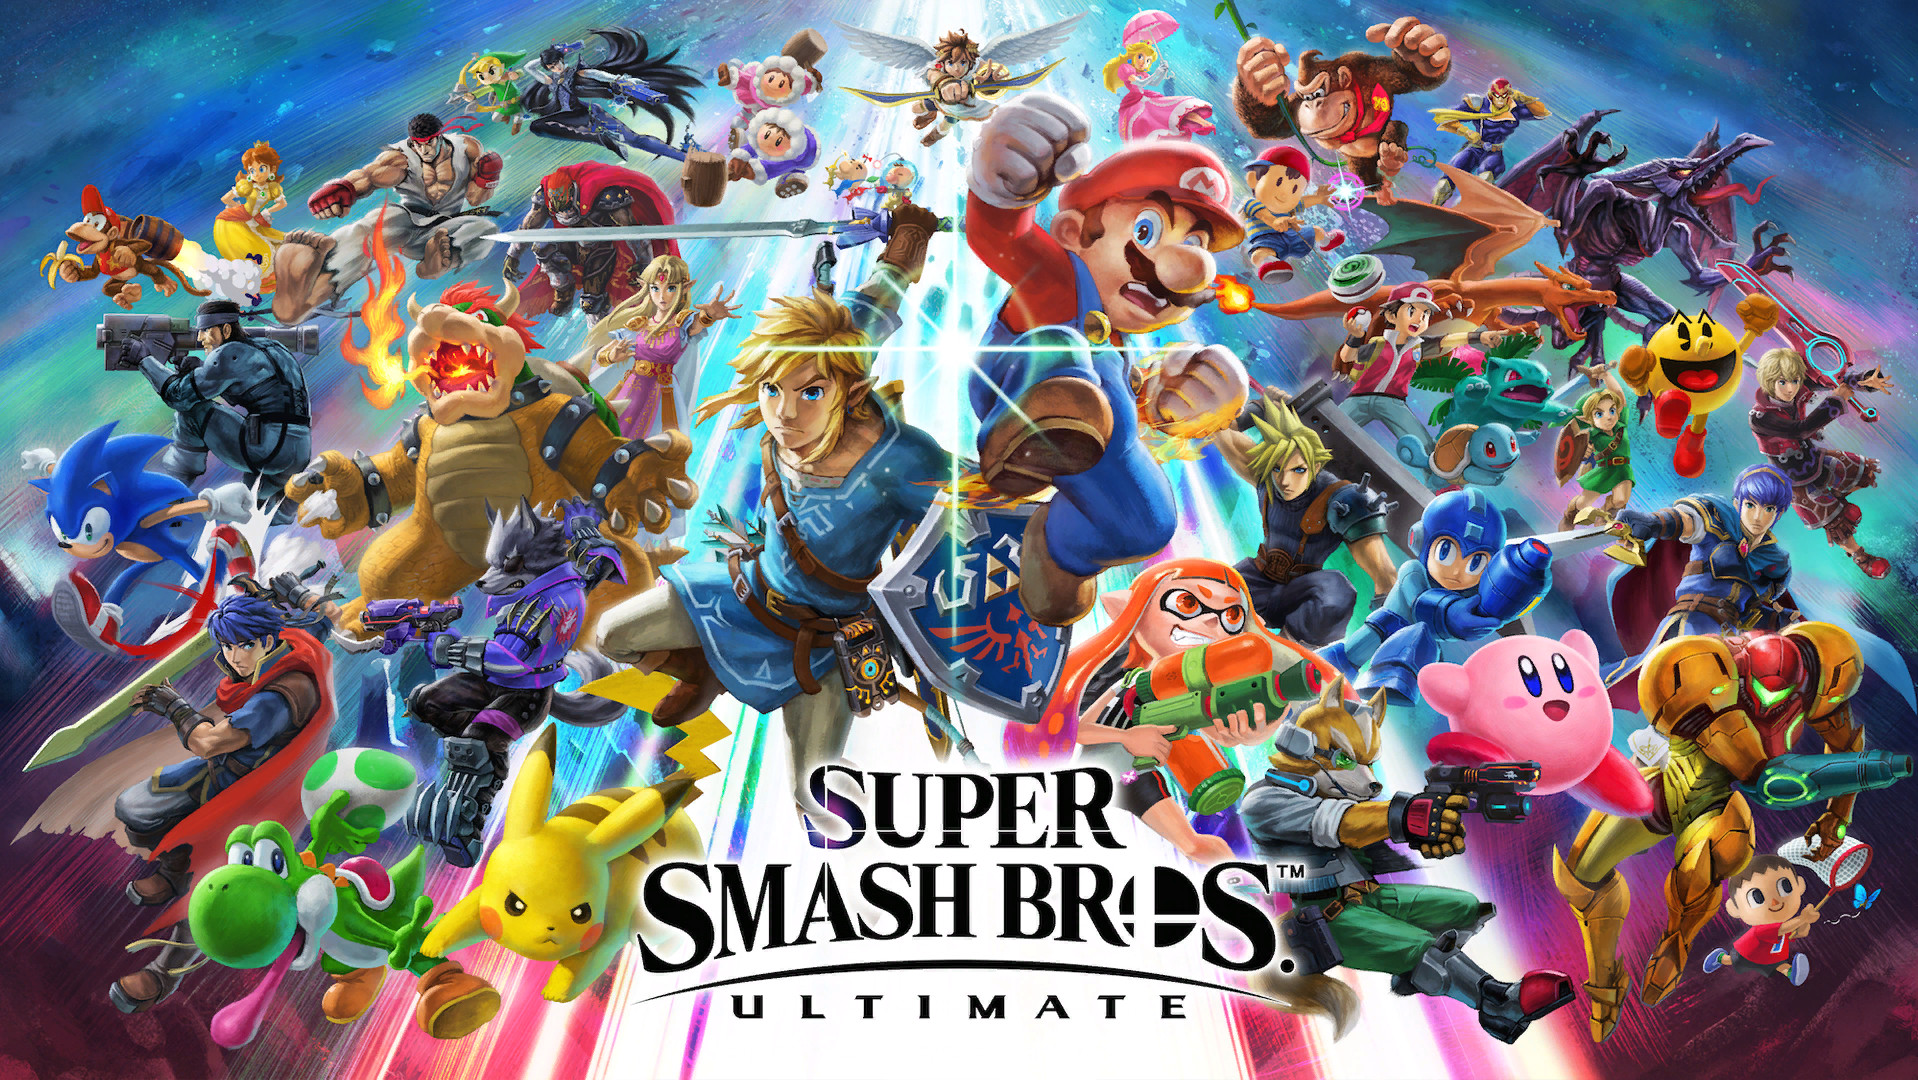 The Smash Ultimate logo with all the characters leaping behind it.